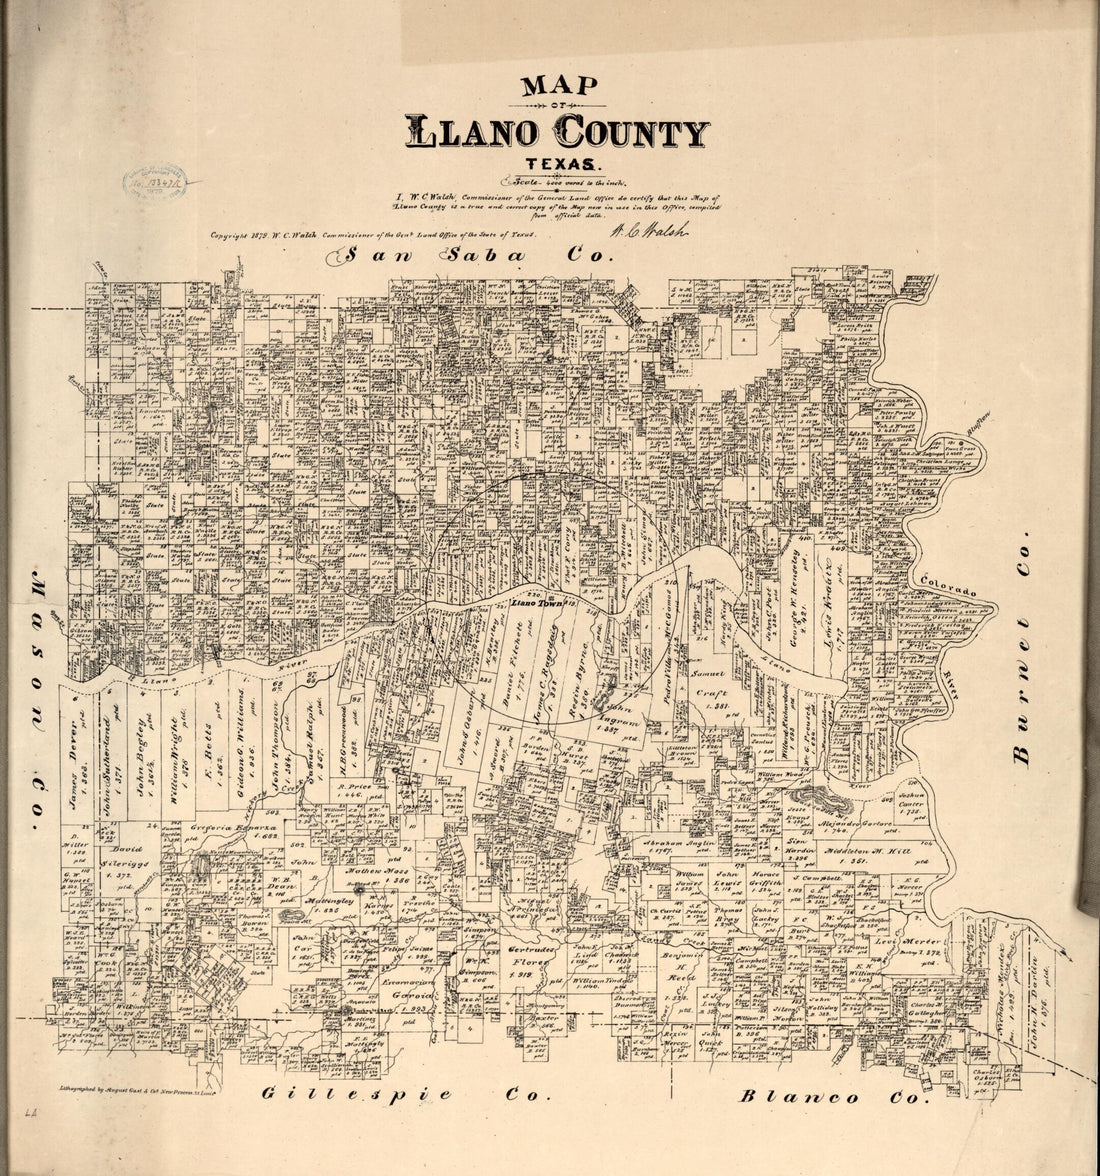 This old map of Map of Llano County, Texas from 1879 was created by  Texas. General Land Office, W. C. (William C.) Walsh in 1879